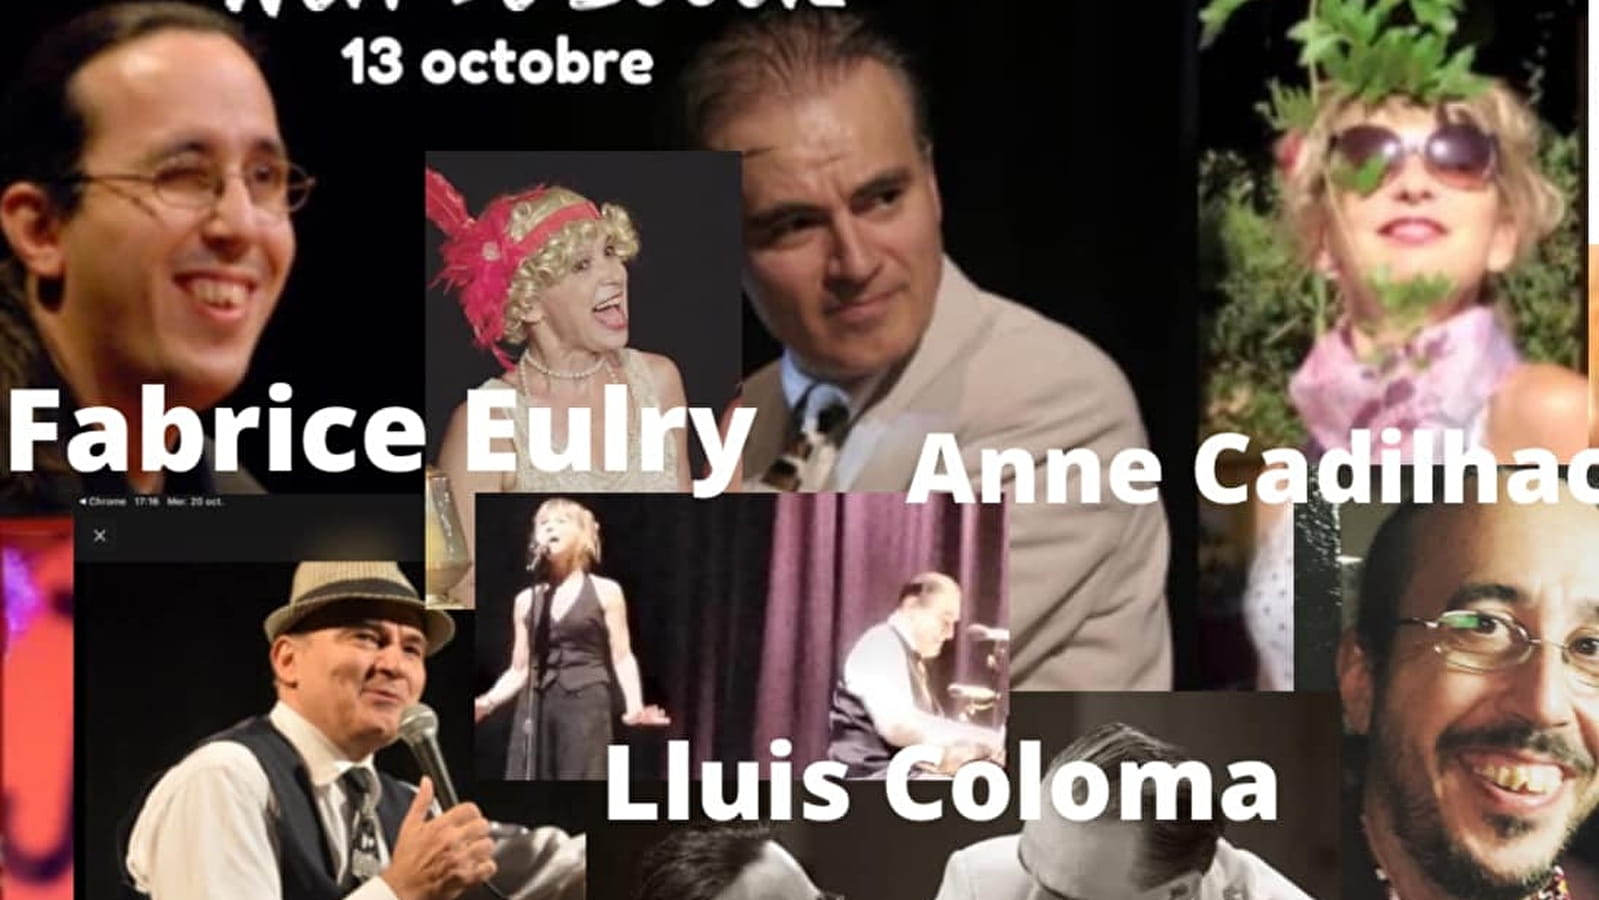 Jazz in Trivy - Boogie night with Fabrice Eulry, Anne Cadhilac, Lluis Coloma